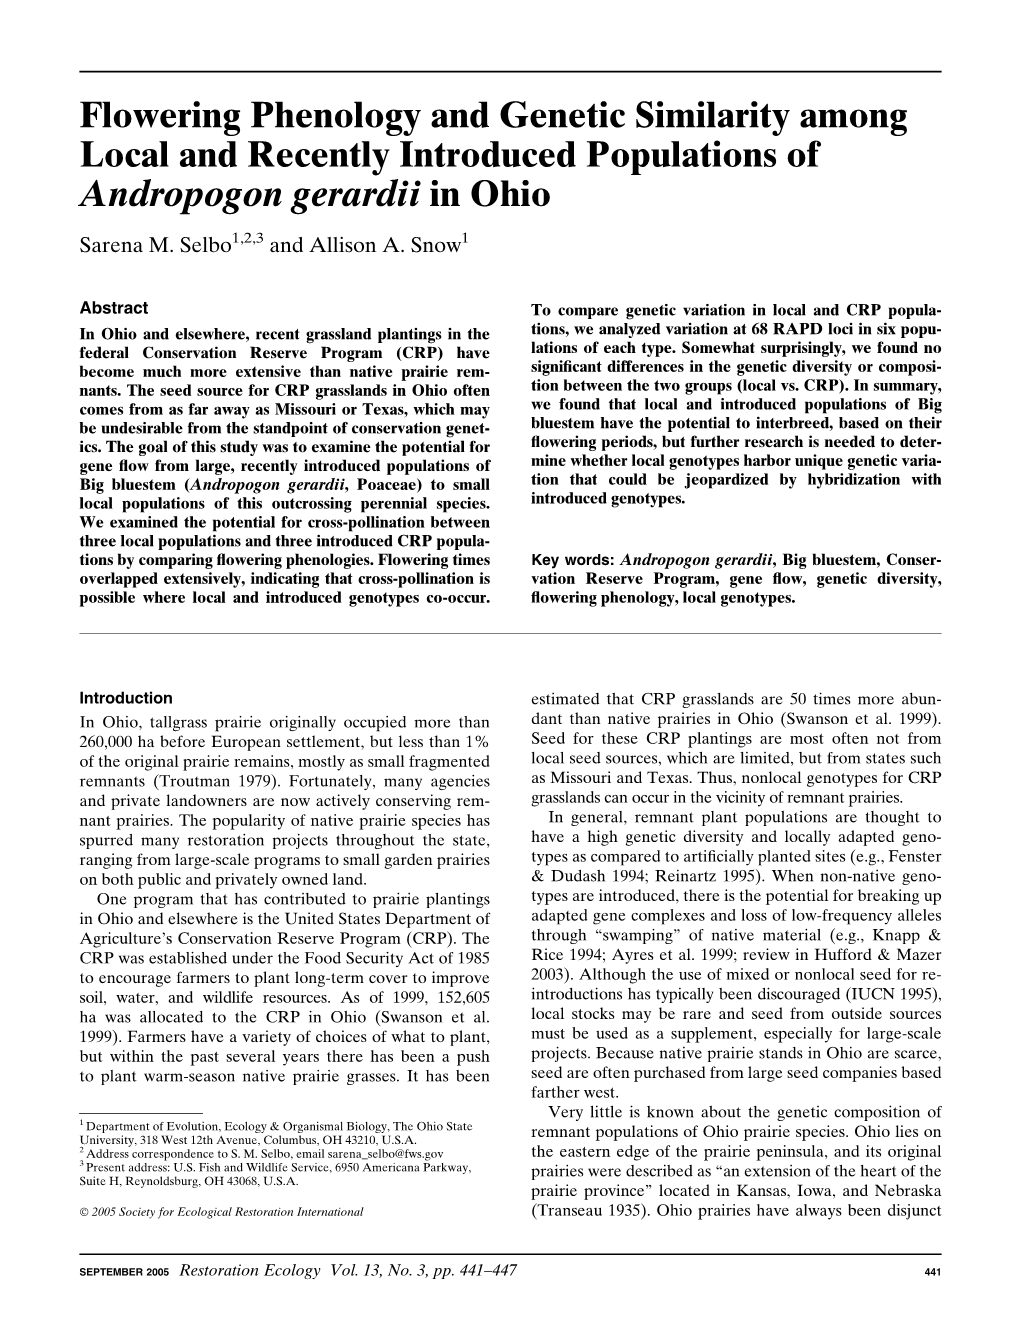 Flowering Phenology and Genetic Similarity Among Local and Recently Introduced Populations of Andropogon Gerardii in Ohio Sarena M